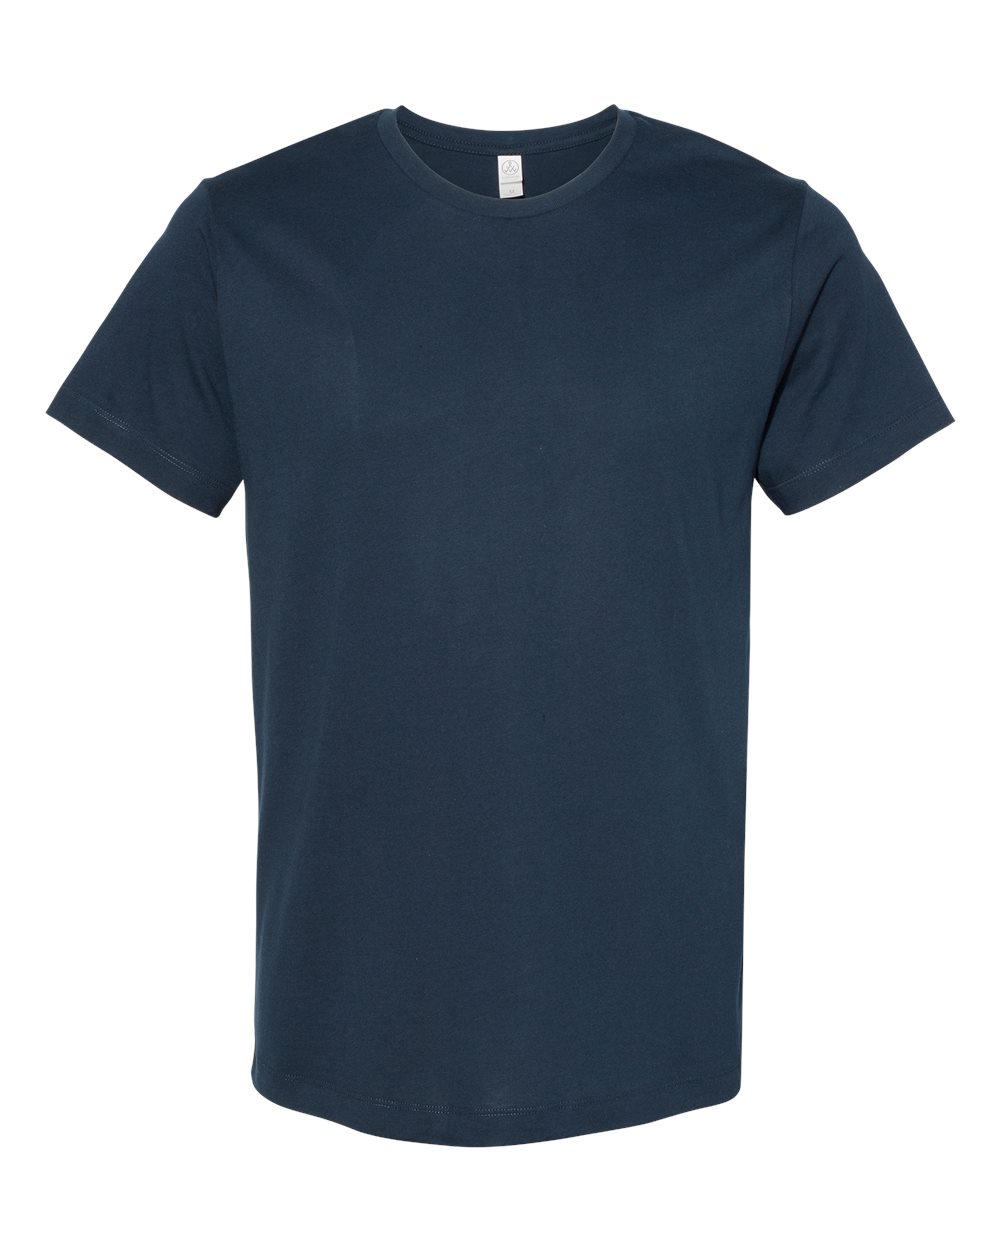 Download Alternative Mens Ringspun Jersey Go-To Tee Shirt 1070 up to 3XL | eBay